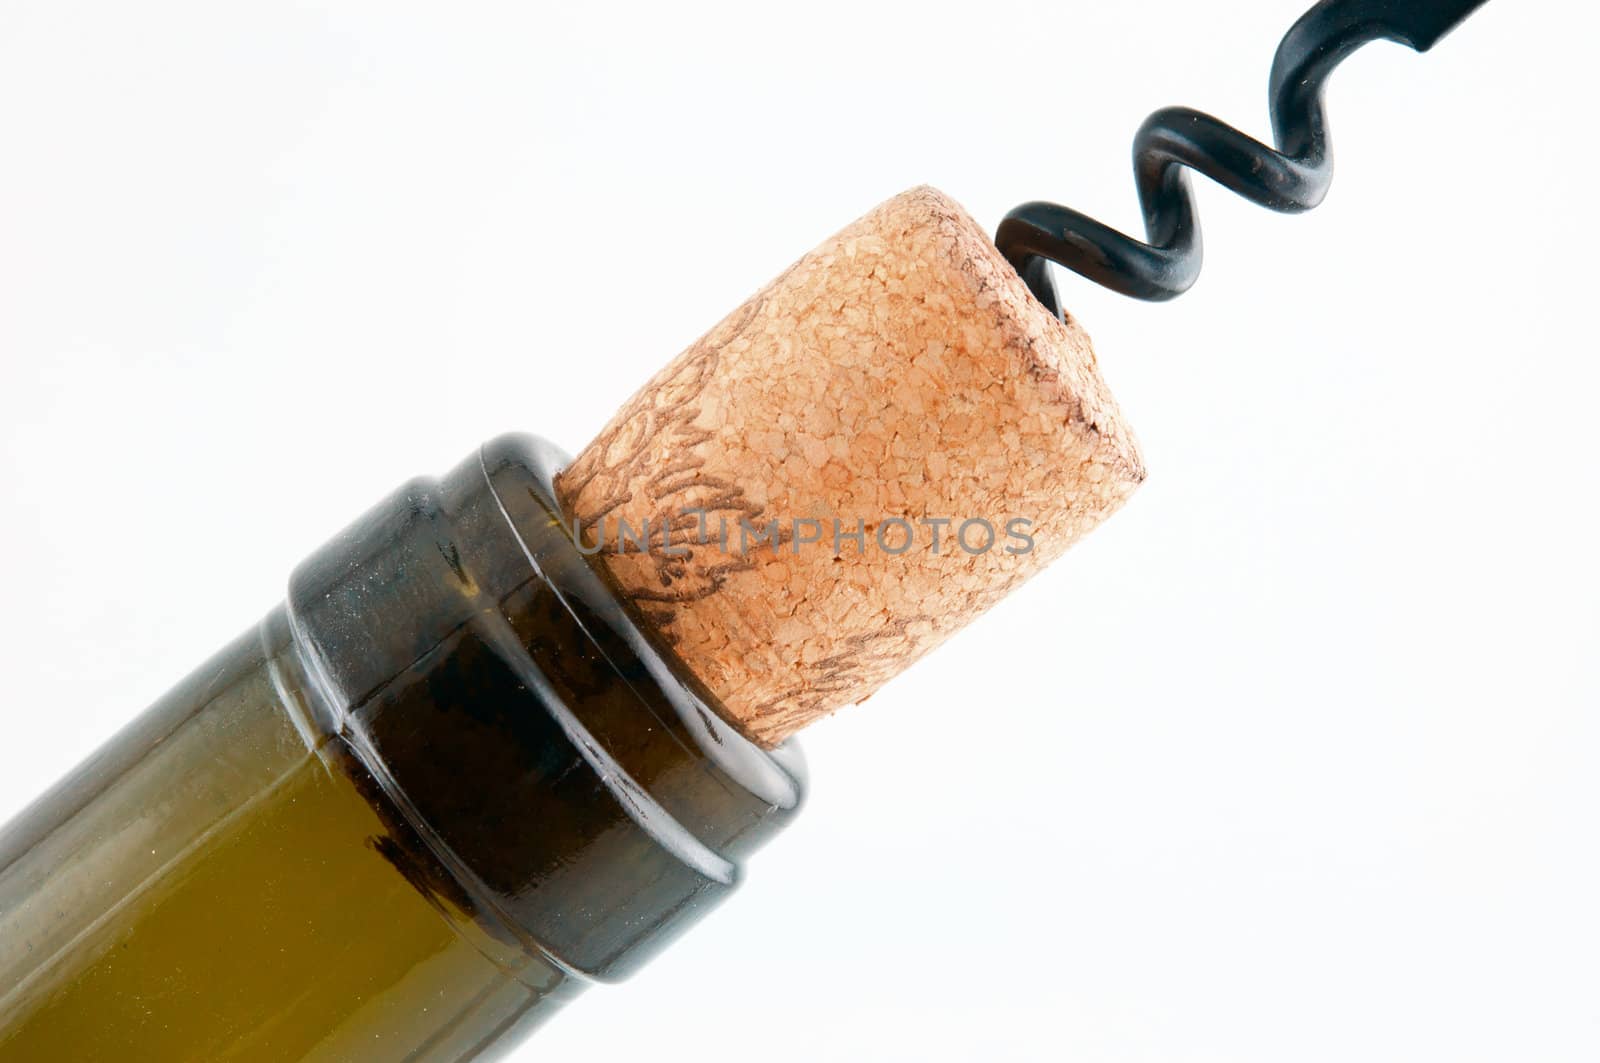 cork bottle  and a spiral key by ben44